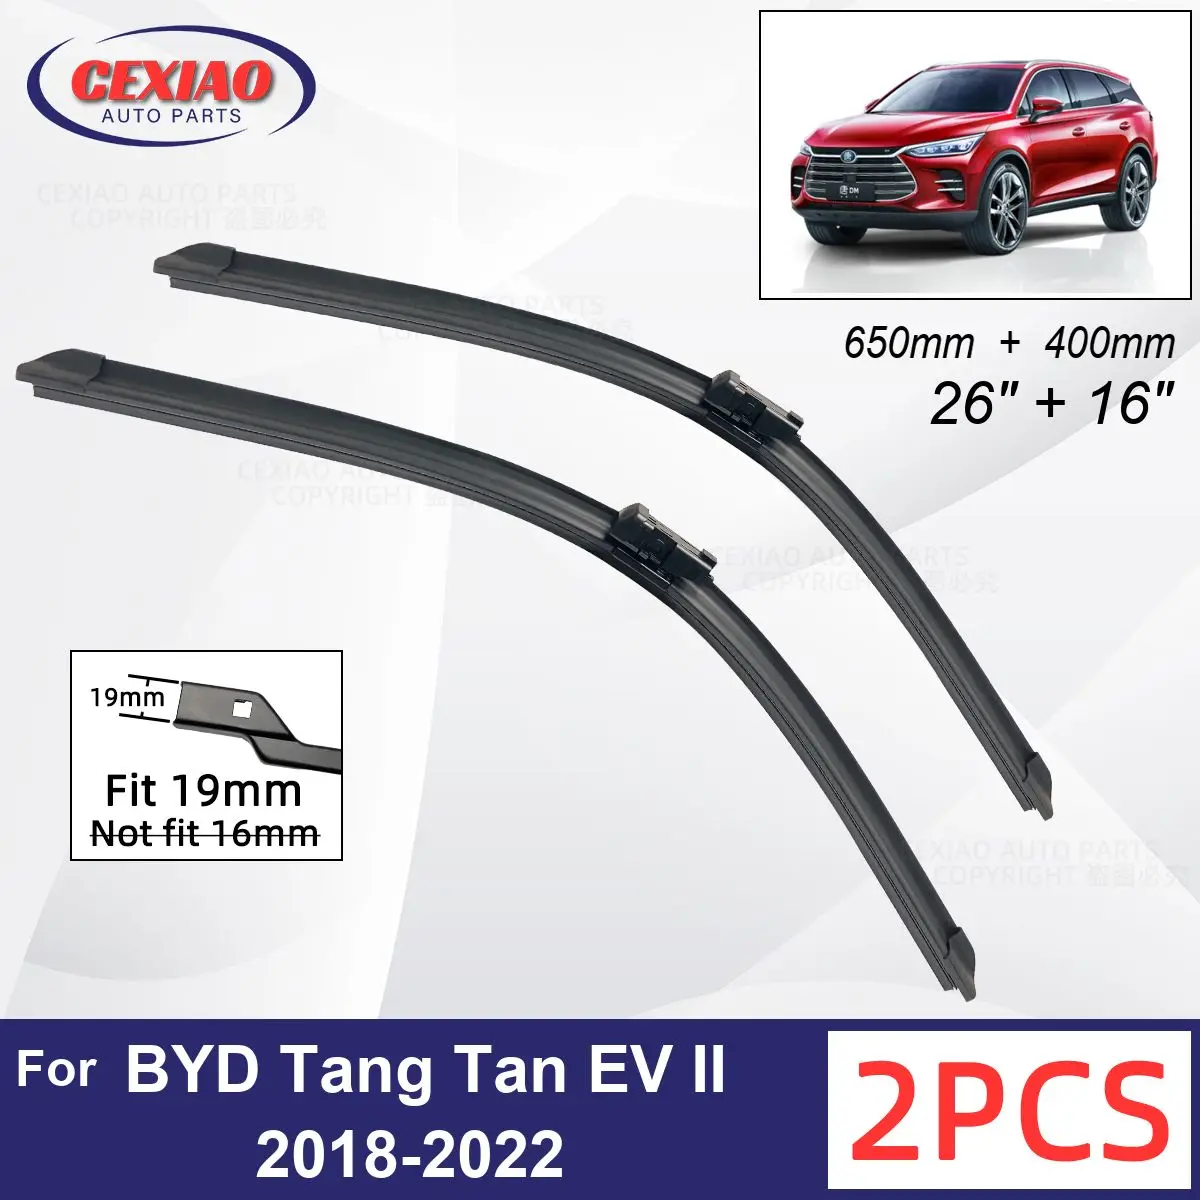 

Car Wiper For BYD Tang Tan EV II 2018-2022 Front Wiper Blades Soft Rubber Windscreen Wipers Auto Windshield 26" 16" 650mm 400mm